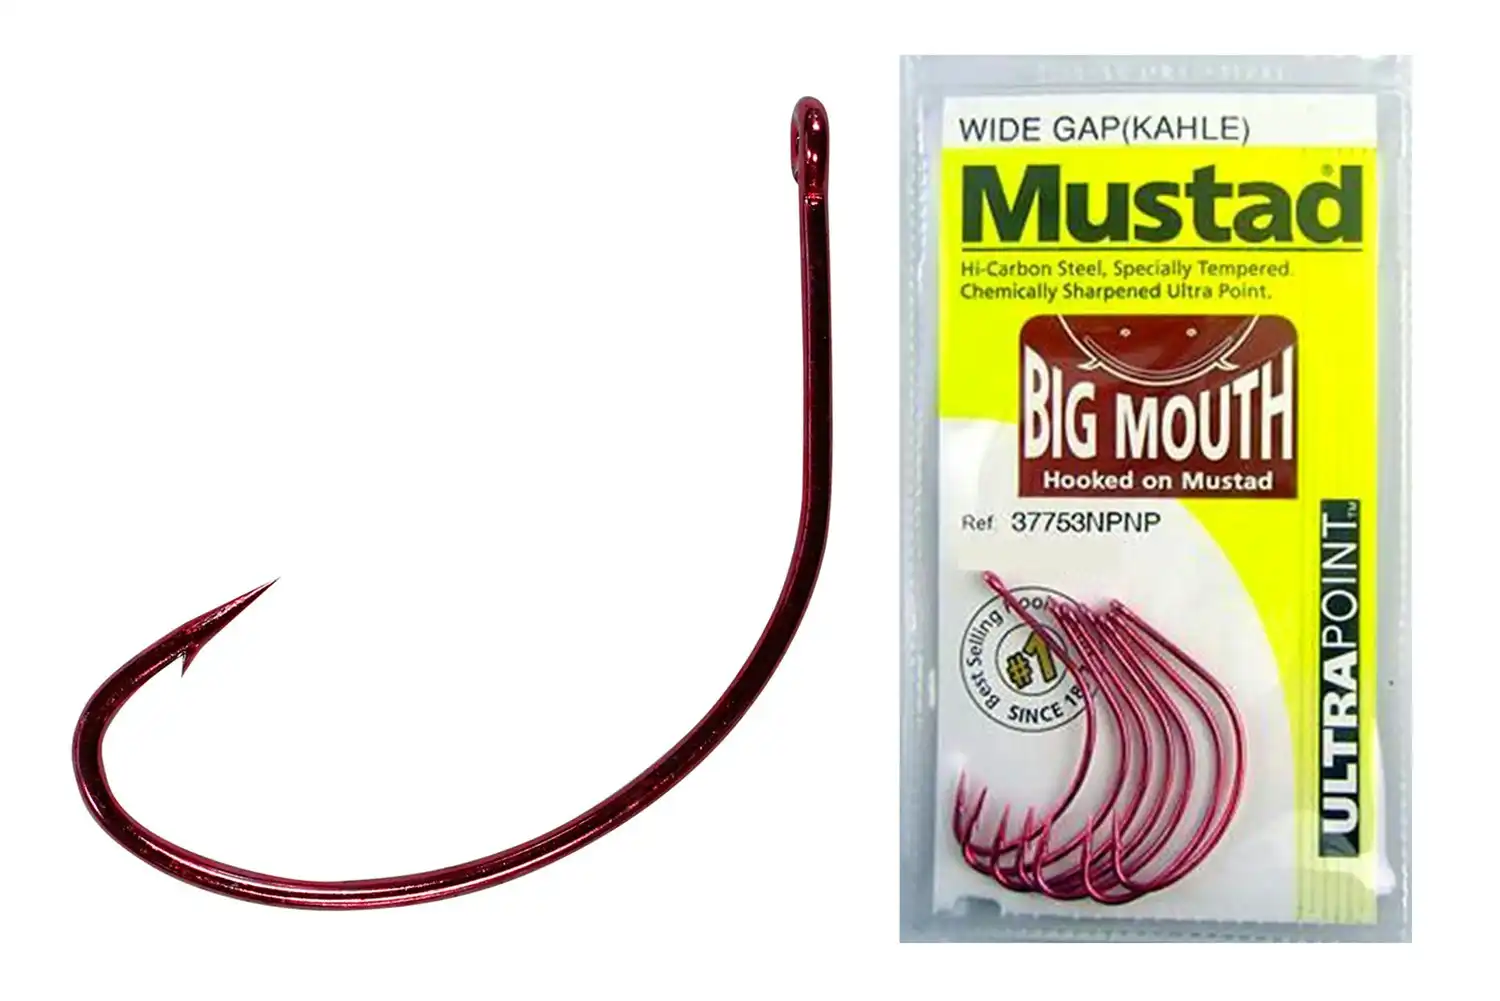 1 Packet of Mustad 37753NPNP Big Mouth Chemically Sharp Fishing Hooks, Hooked Online